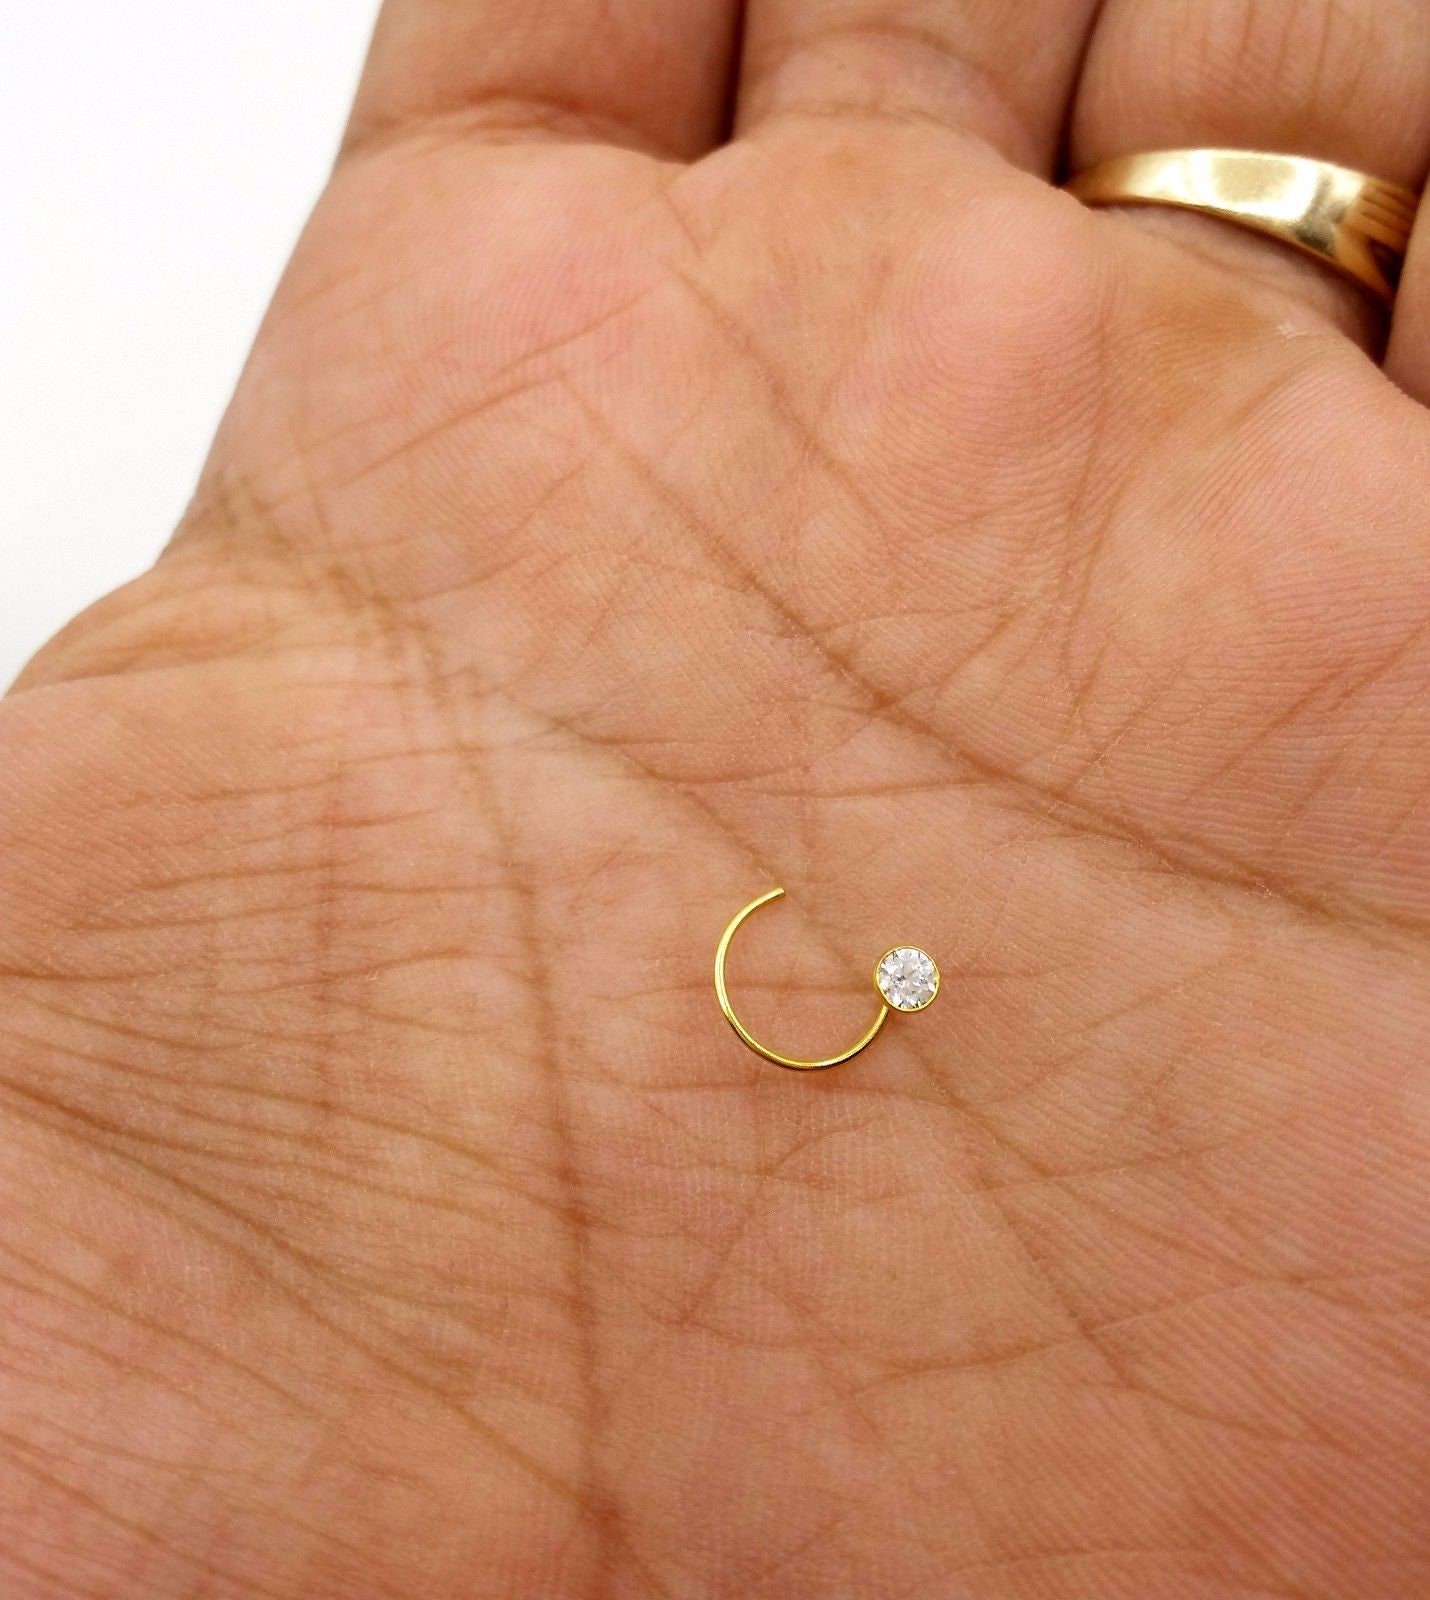 4 MM 18k Gold Nose Pin Stud Ring White Stone Simple Jewel Best Price India  111 | eBay